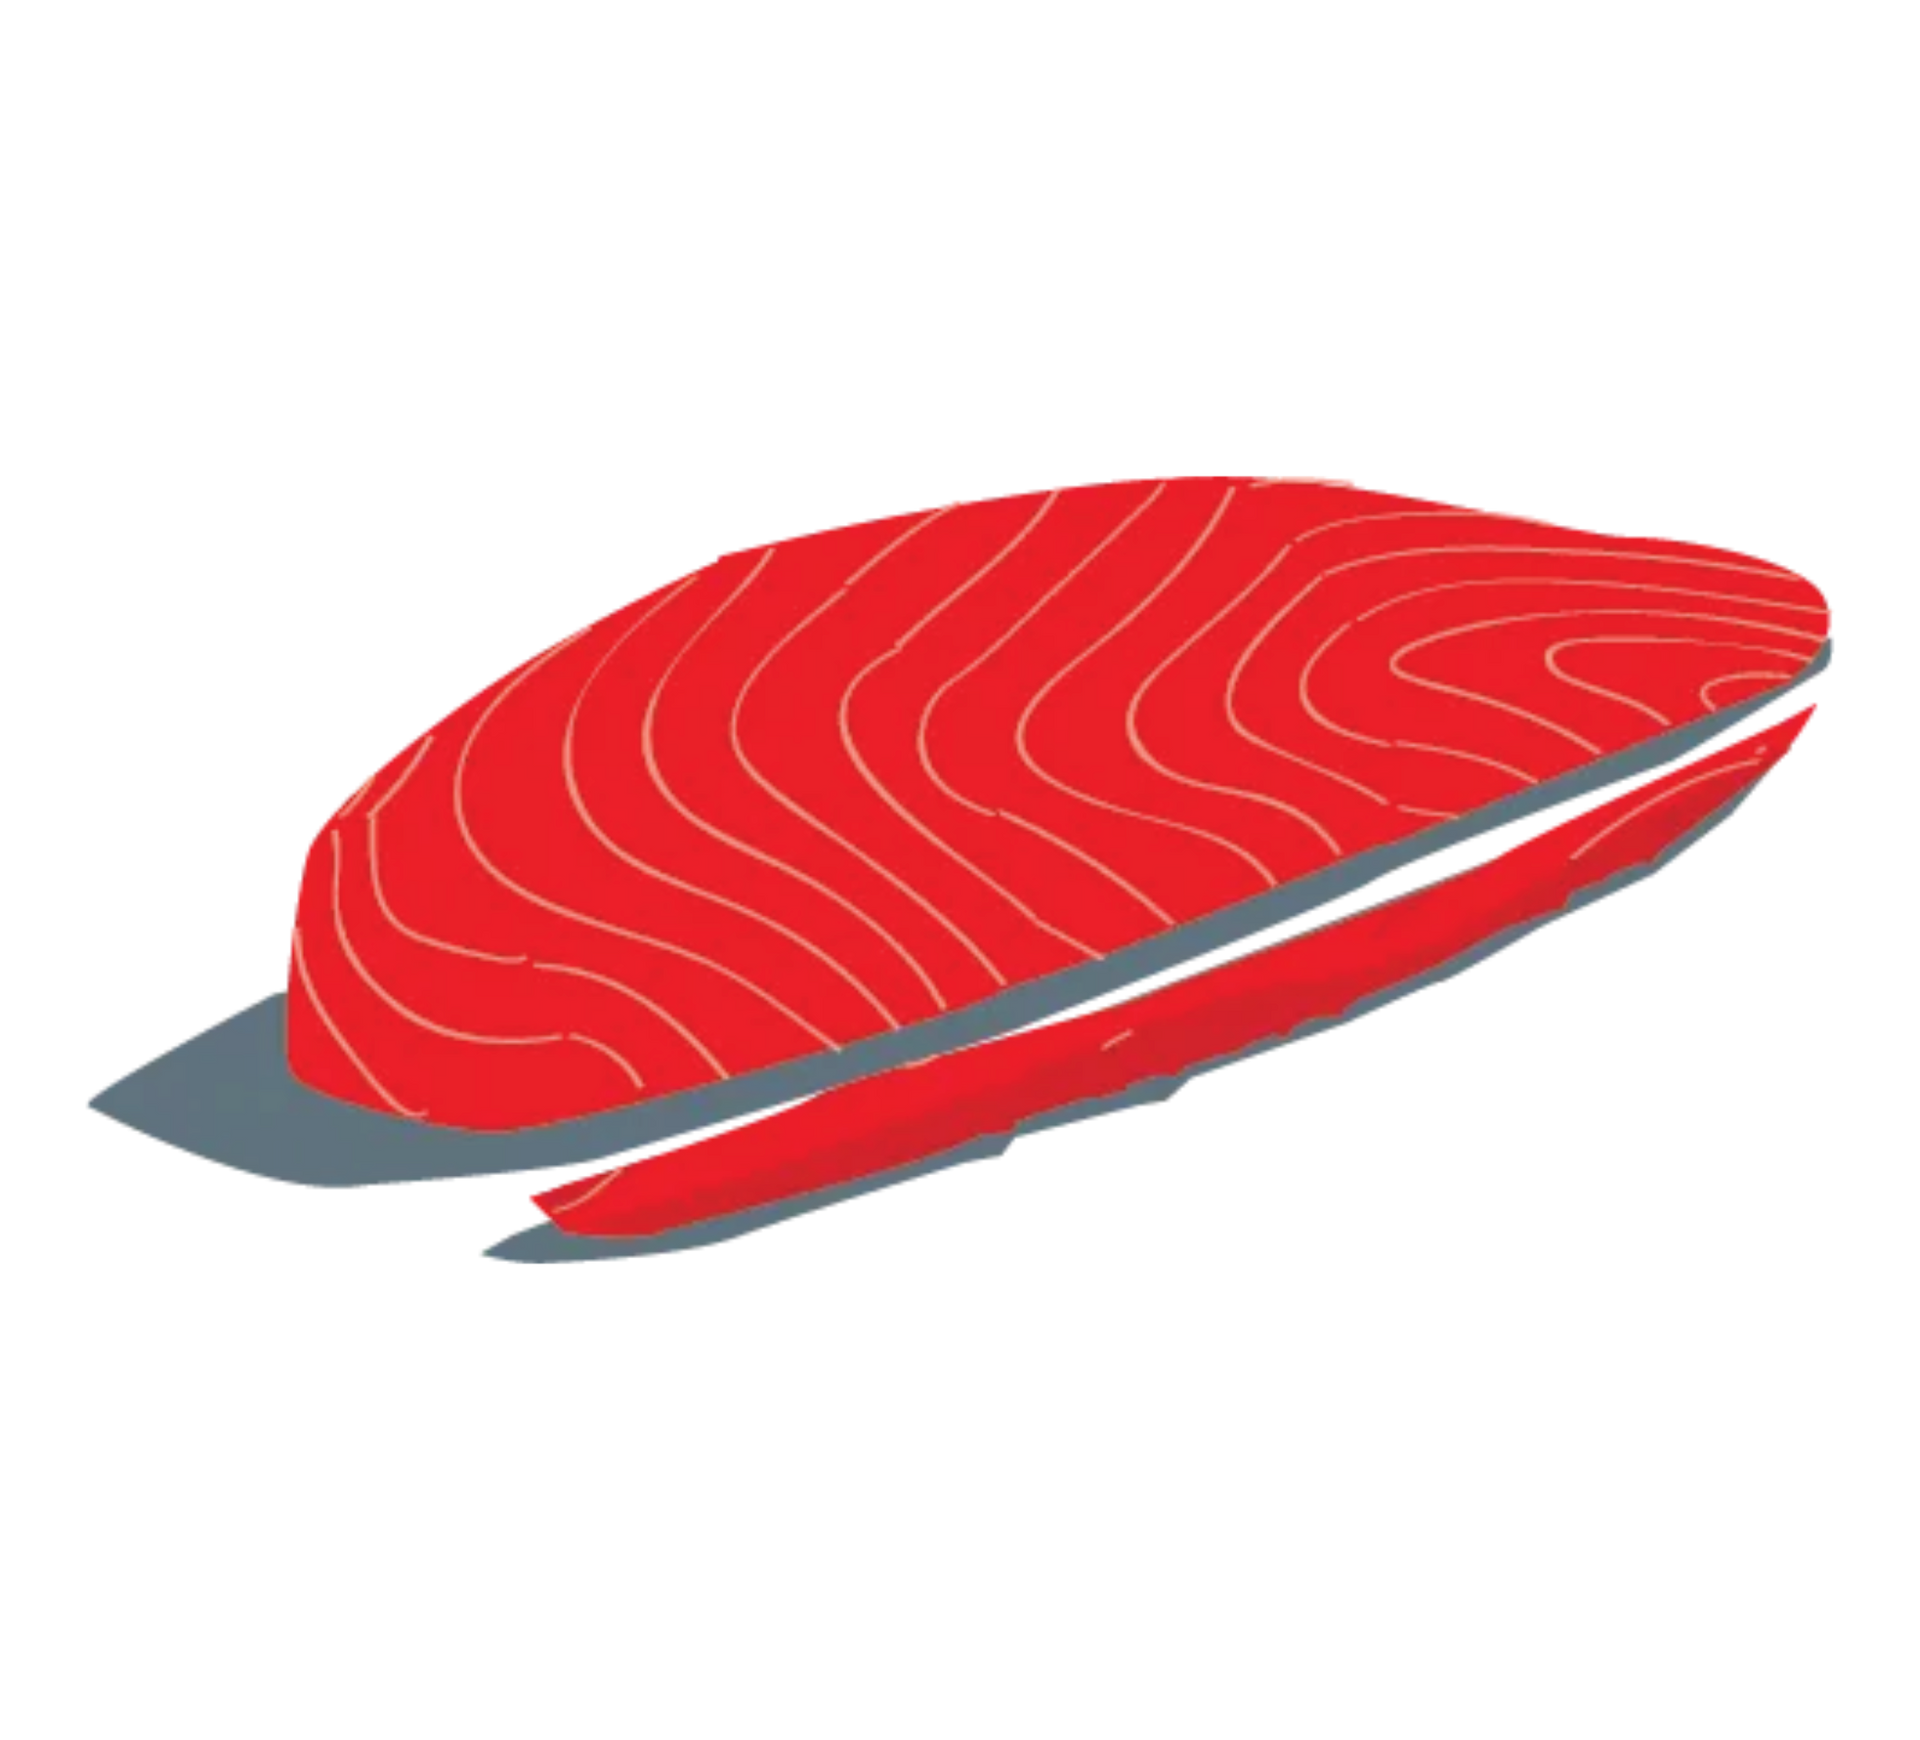 An illustration of a piece of salmon on a plate.